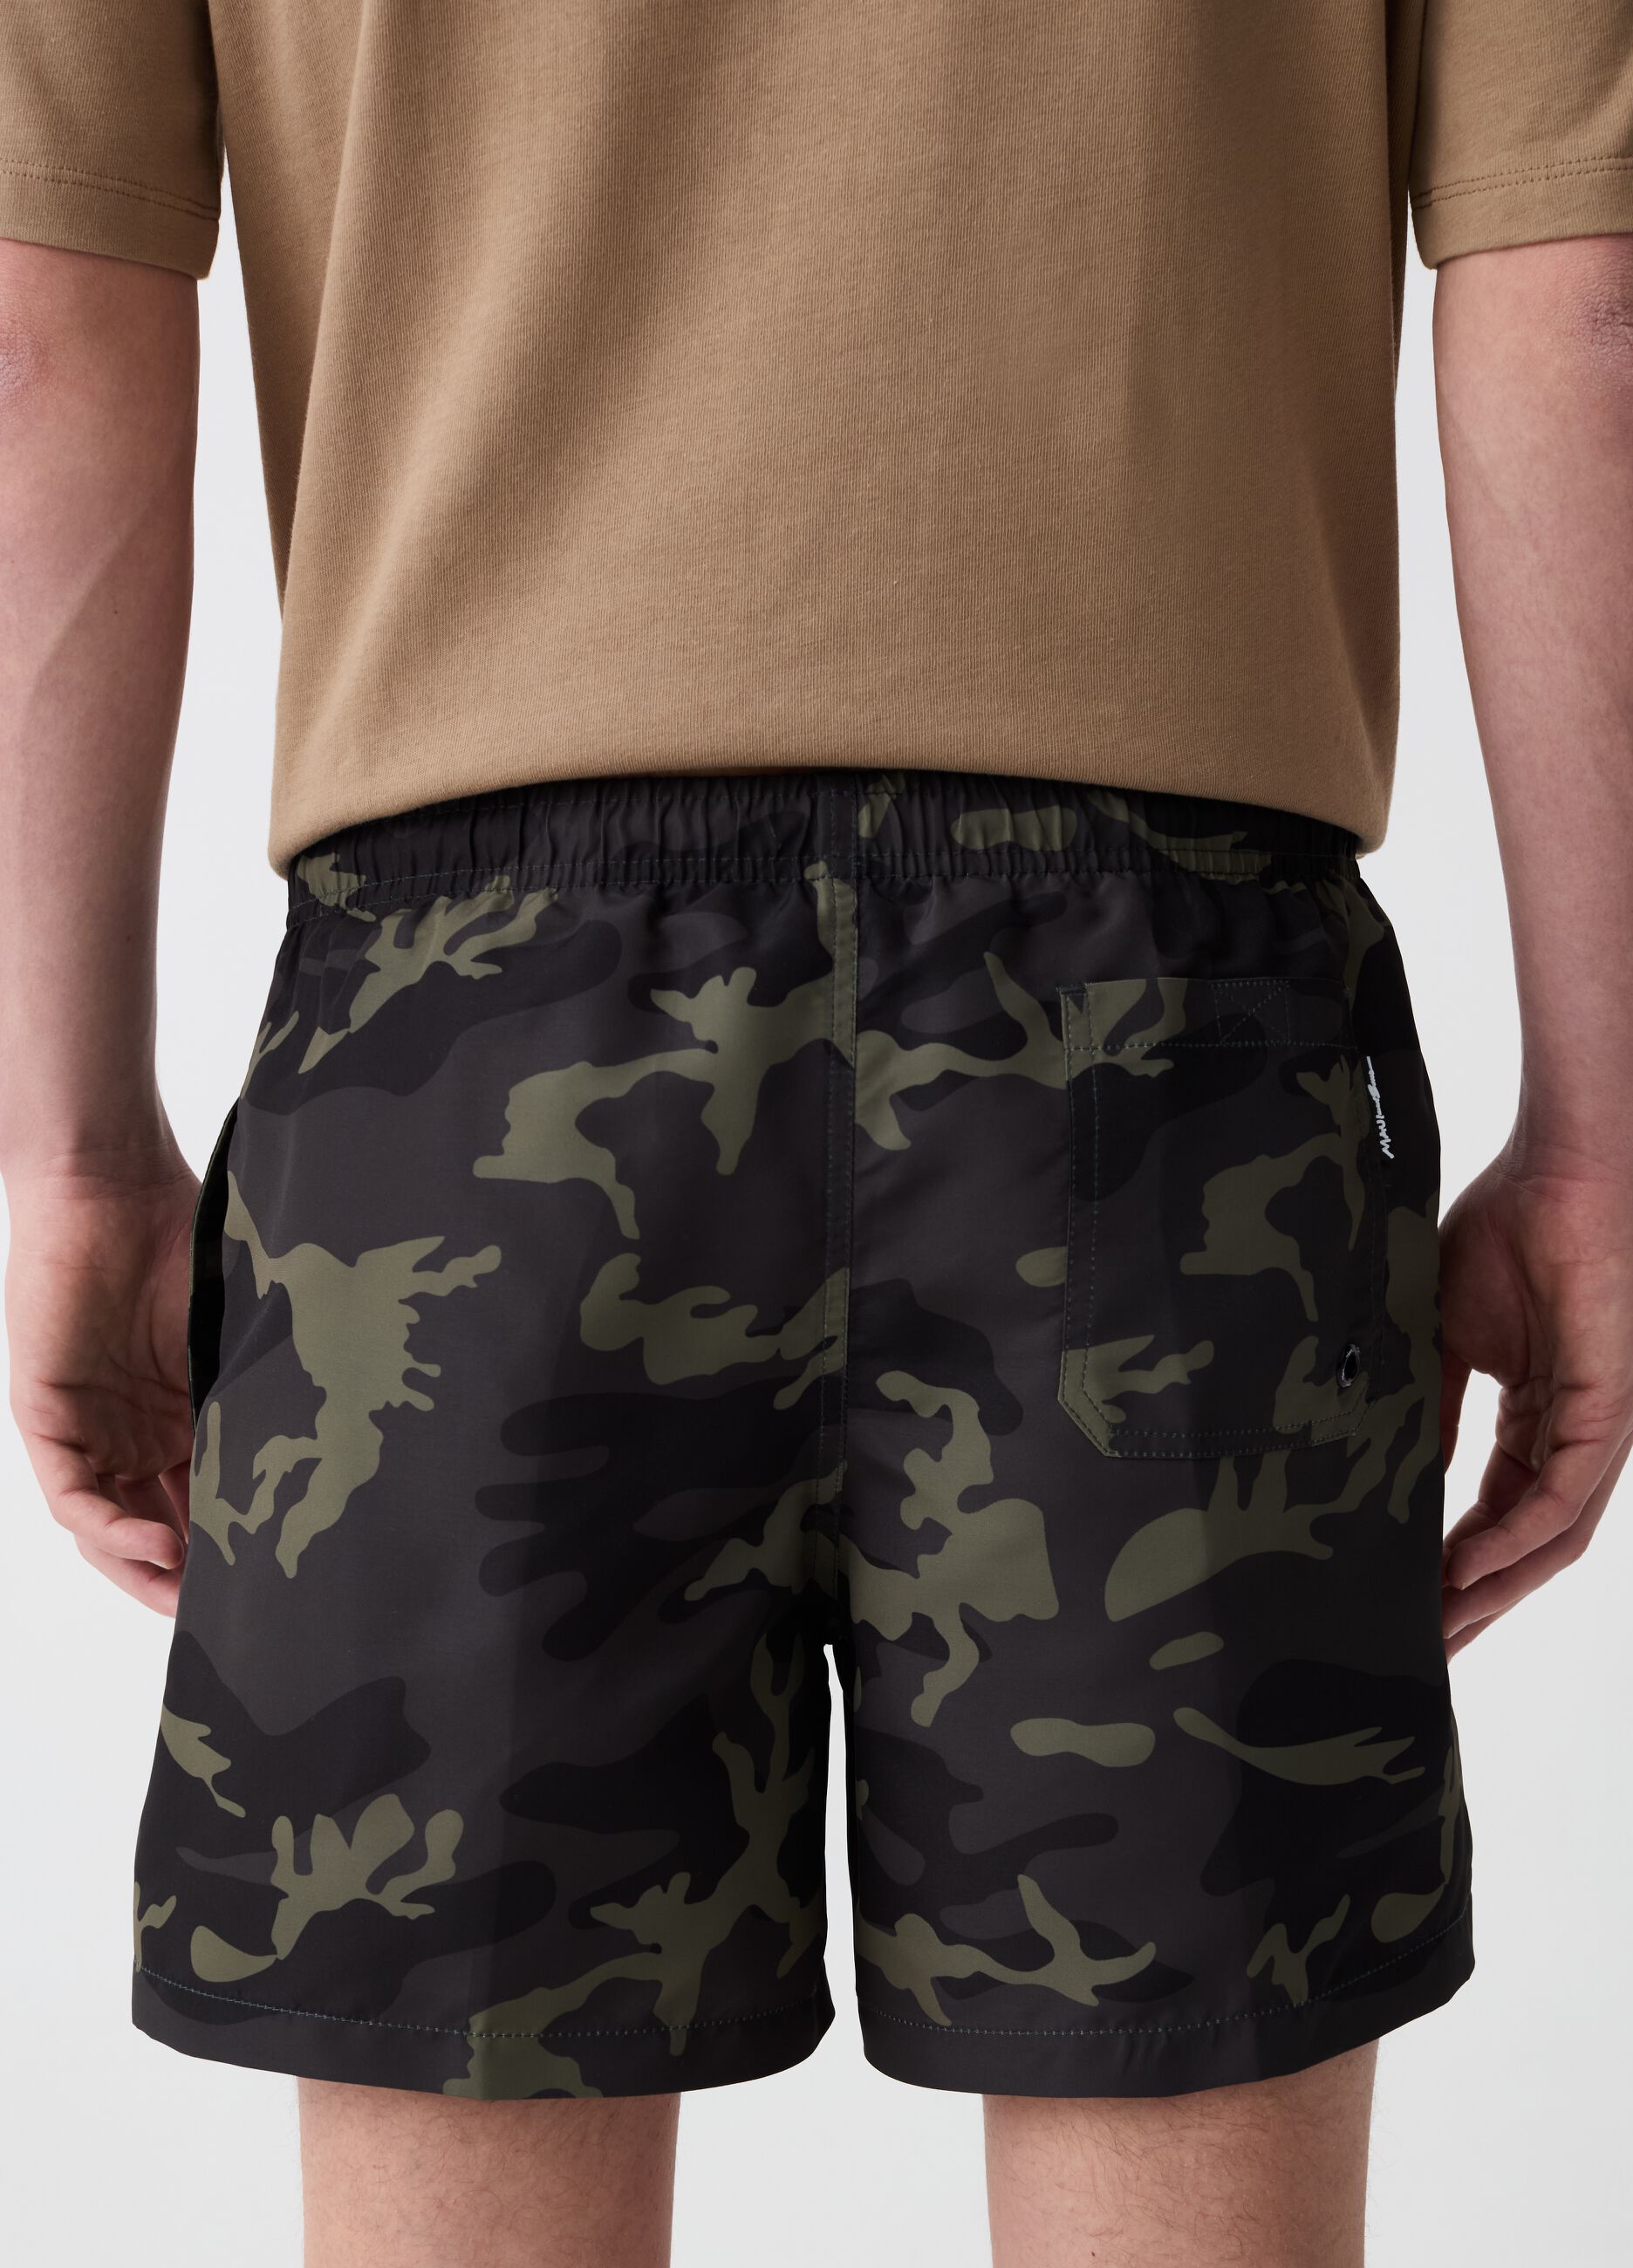 Camouflage swimming trunks